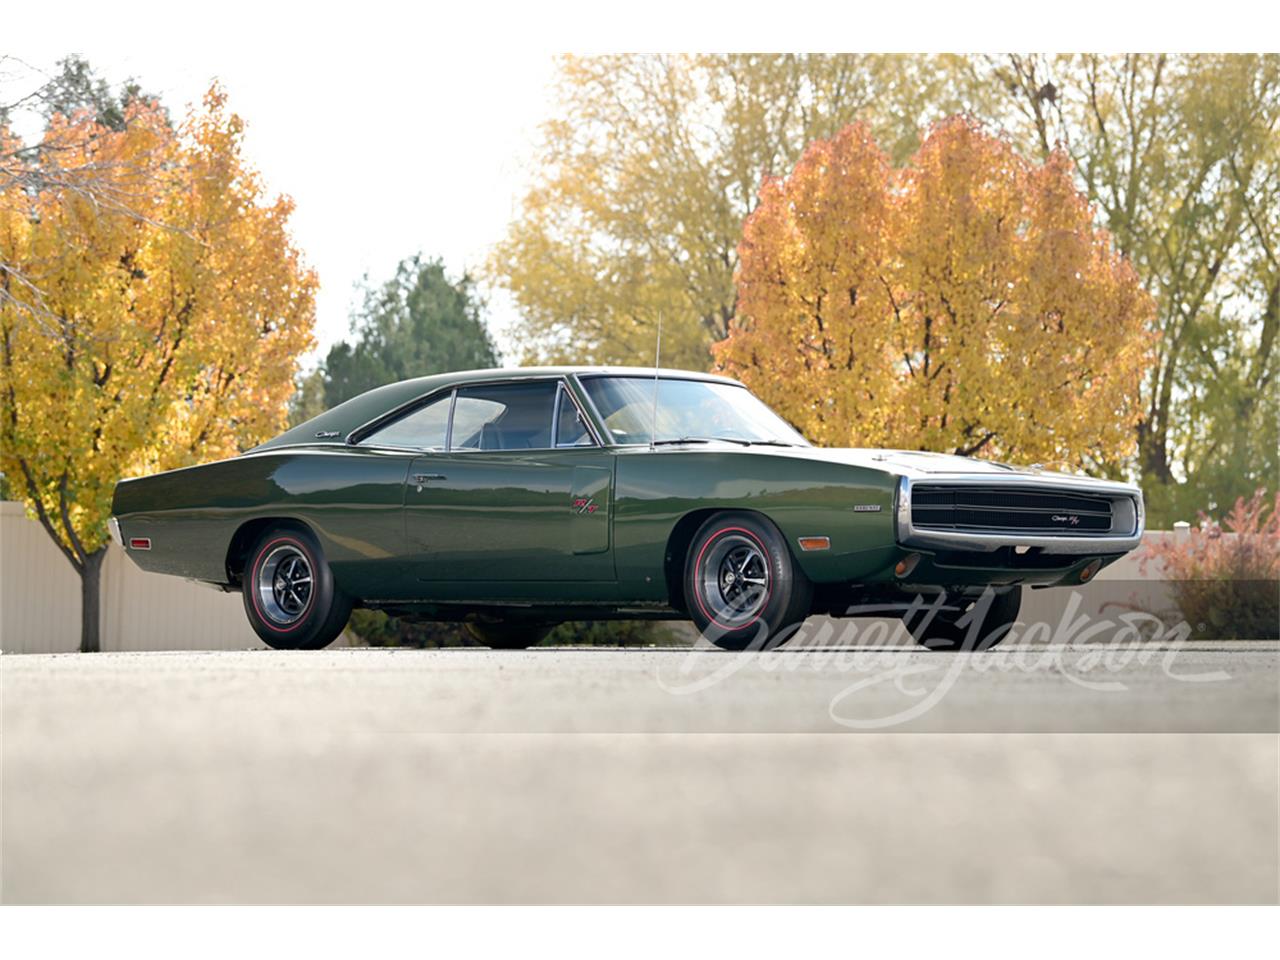 For Sale at Auction: 1970 Dodge Charger R/T in Scottsdale, Arizona for sale in Scottsdale, AZ